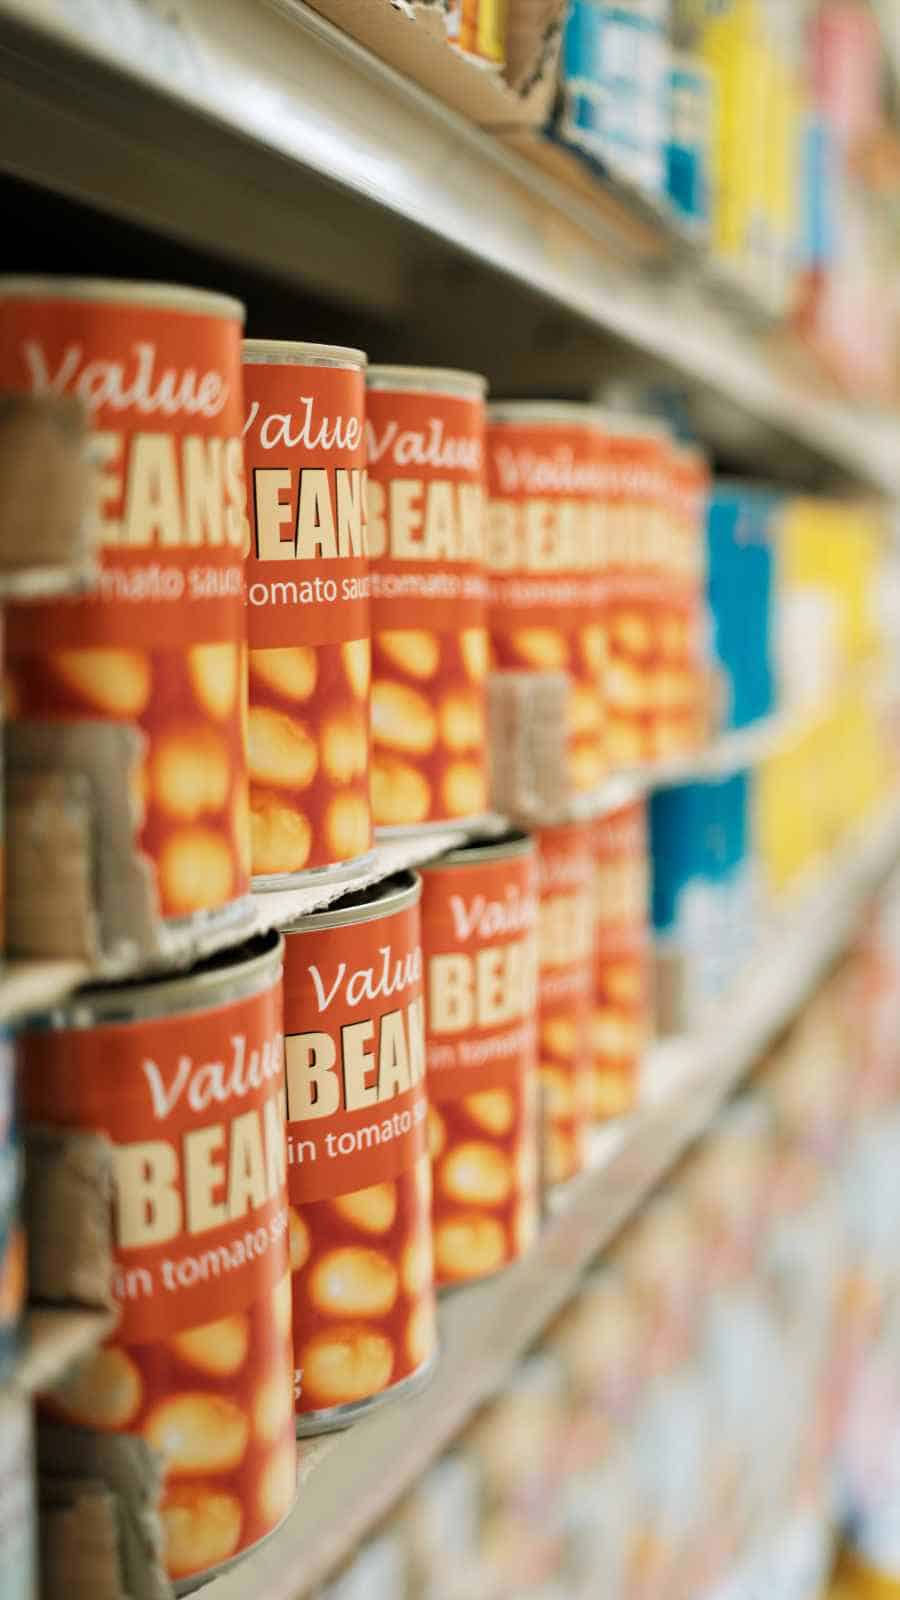 An image showing groceeries in a supermarket with a focus on canned beans